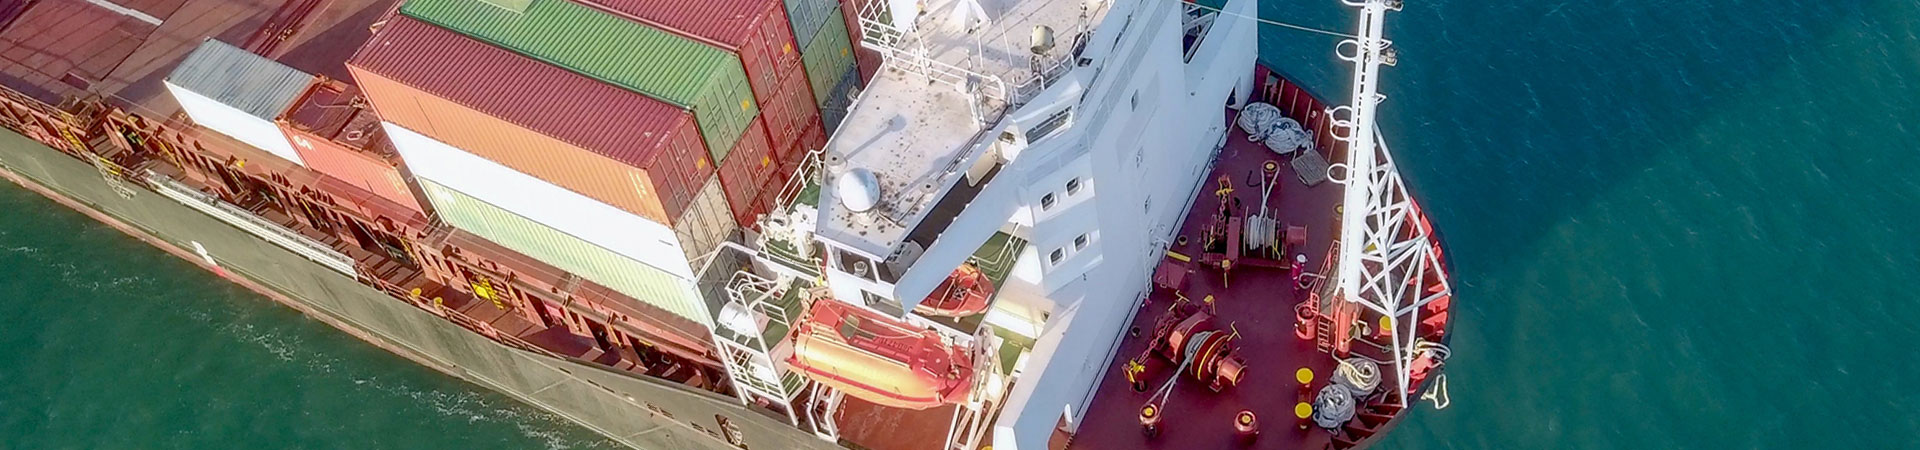 Large Cargo and RoRo (Roll On-Off) ship at sea, loaded with a small amount of shipping containers